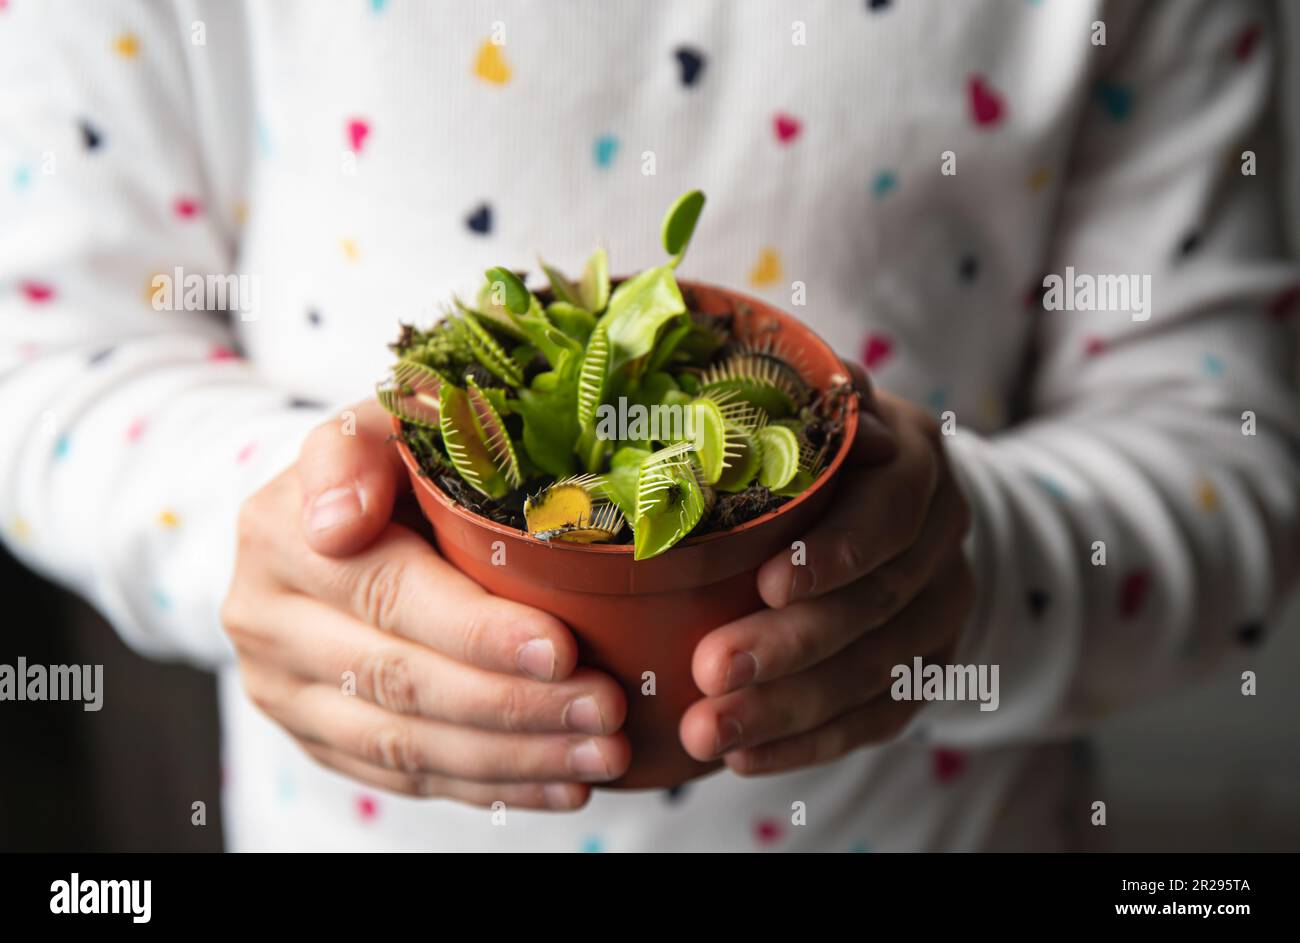 Close up view of child hands holding The Venus flytrap, Dionaea muscipula flower pot in hands in home. Interesting alternative house plant concept. Stock Photo